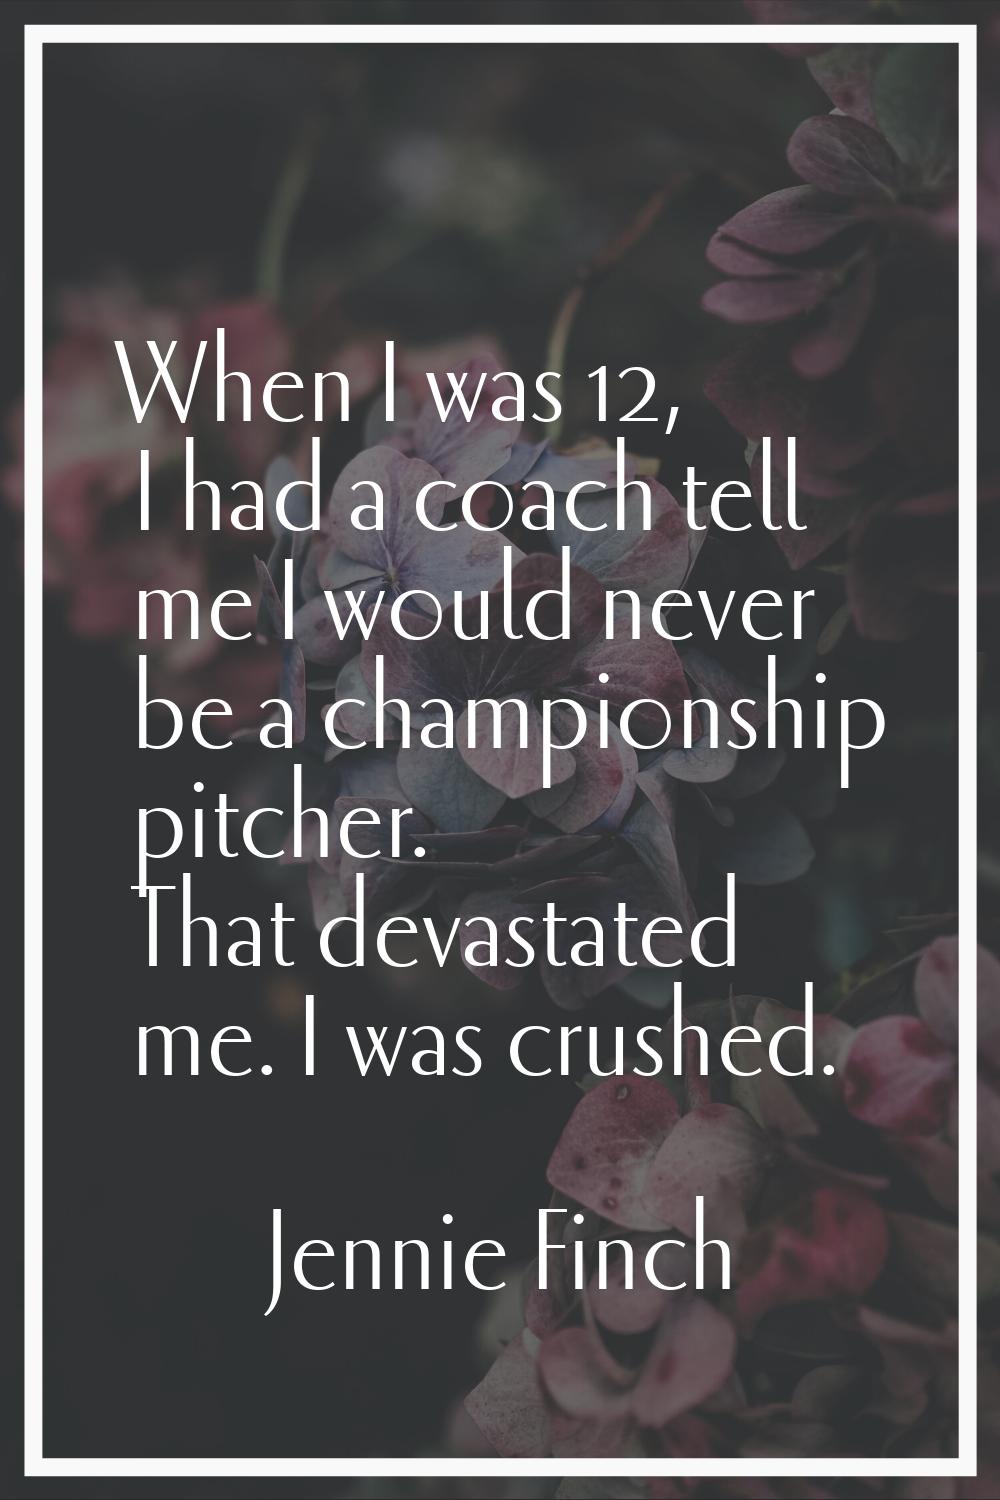 When I was 12, I had a coach tell me I would never be a championship pitcher. That devastated me. I